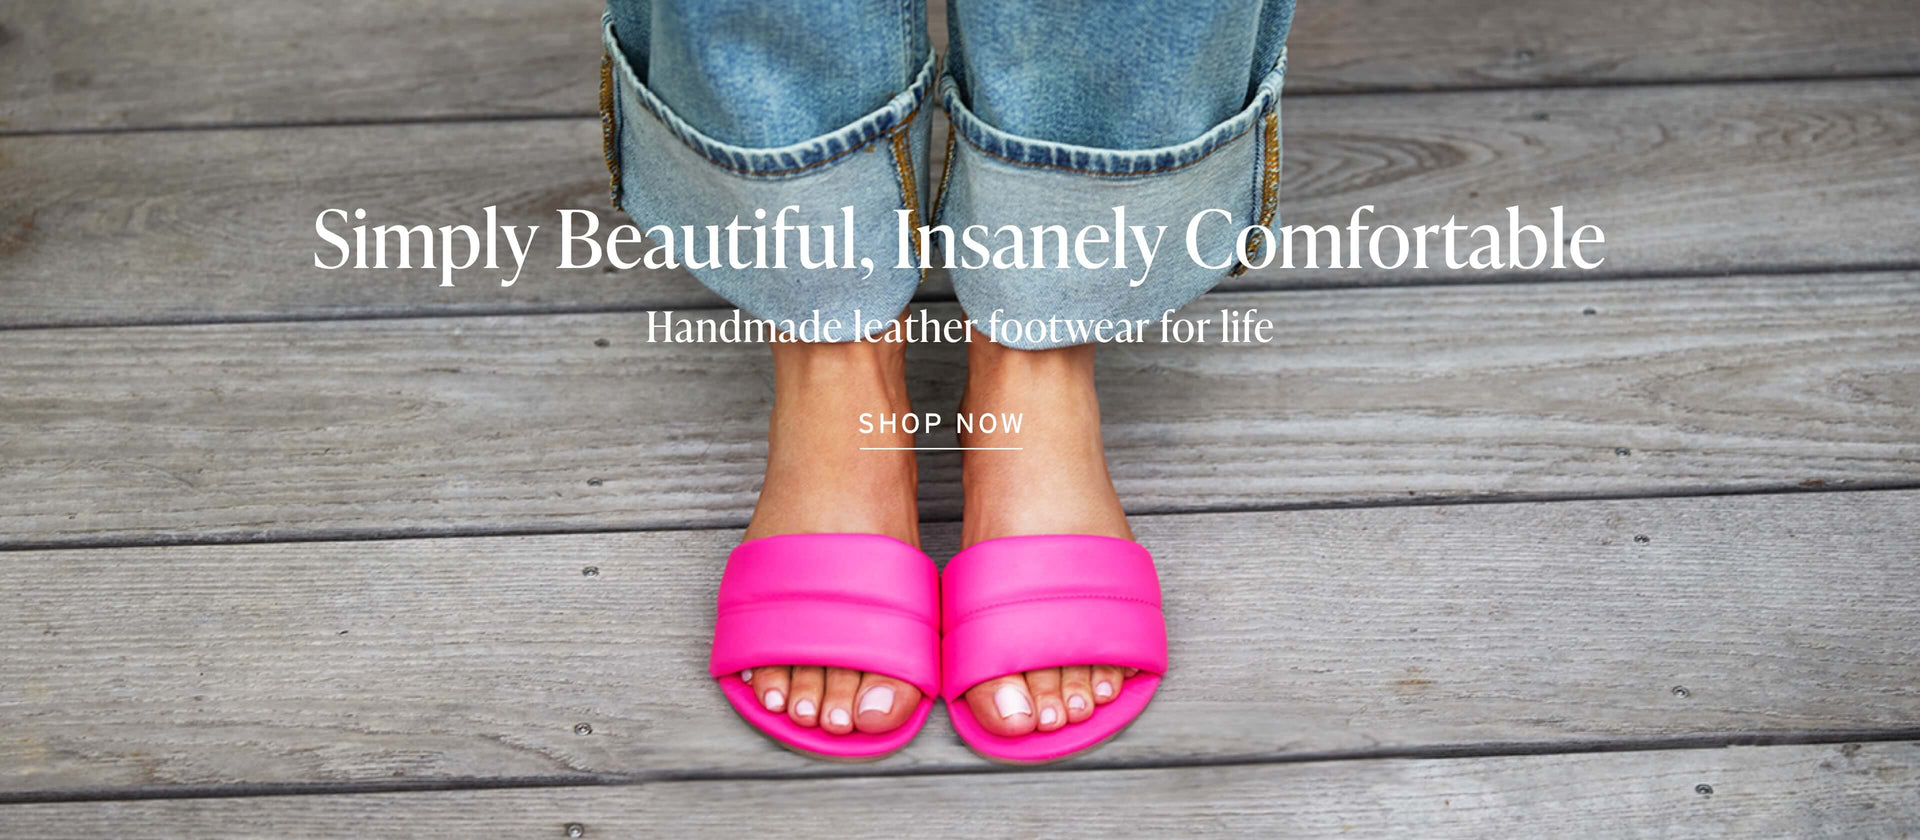 Woman wearing Sugarbird leather slide sandals in azalea with text overlay "Simply Beautiful, Insanely Comfortable; Handmade leather footwear for life" and Shop Now button.